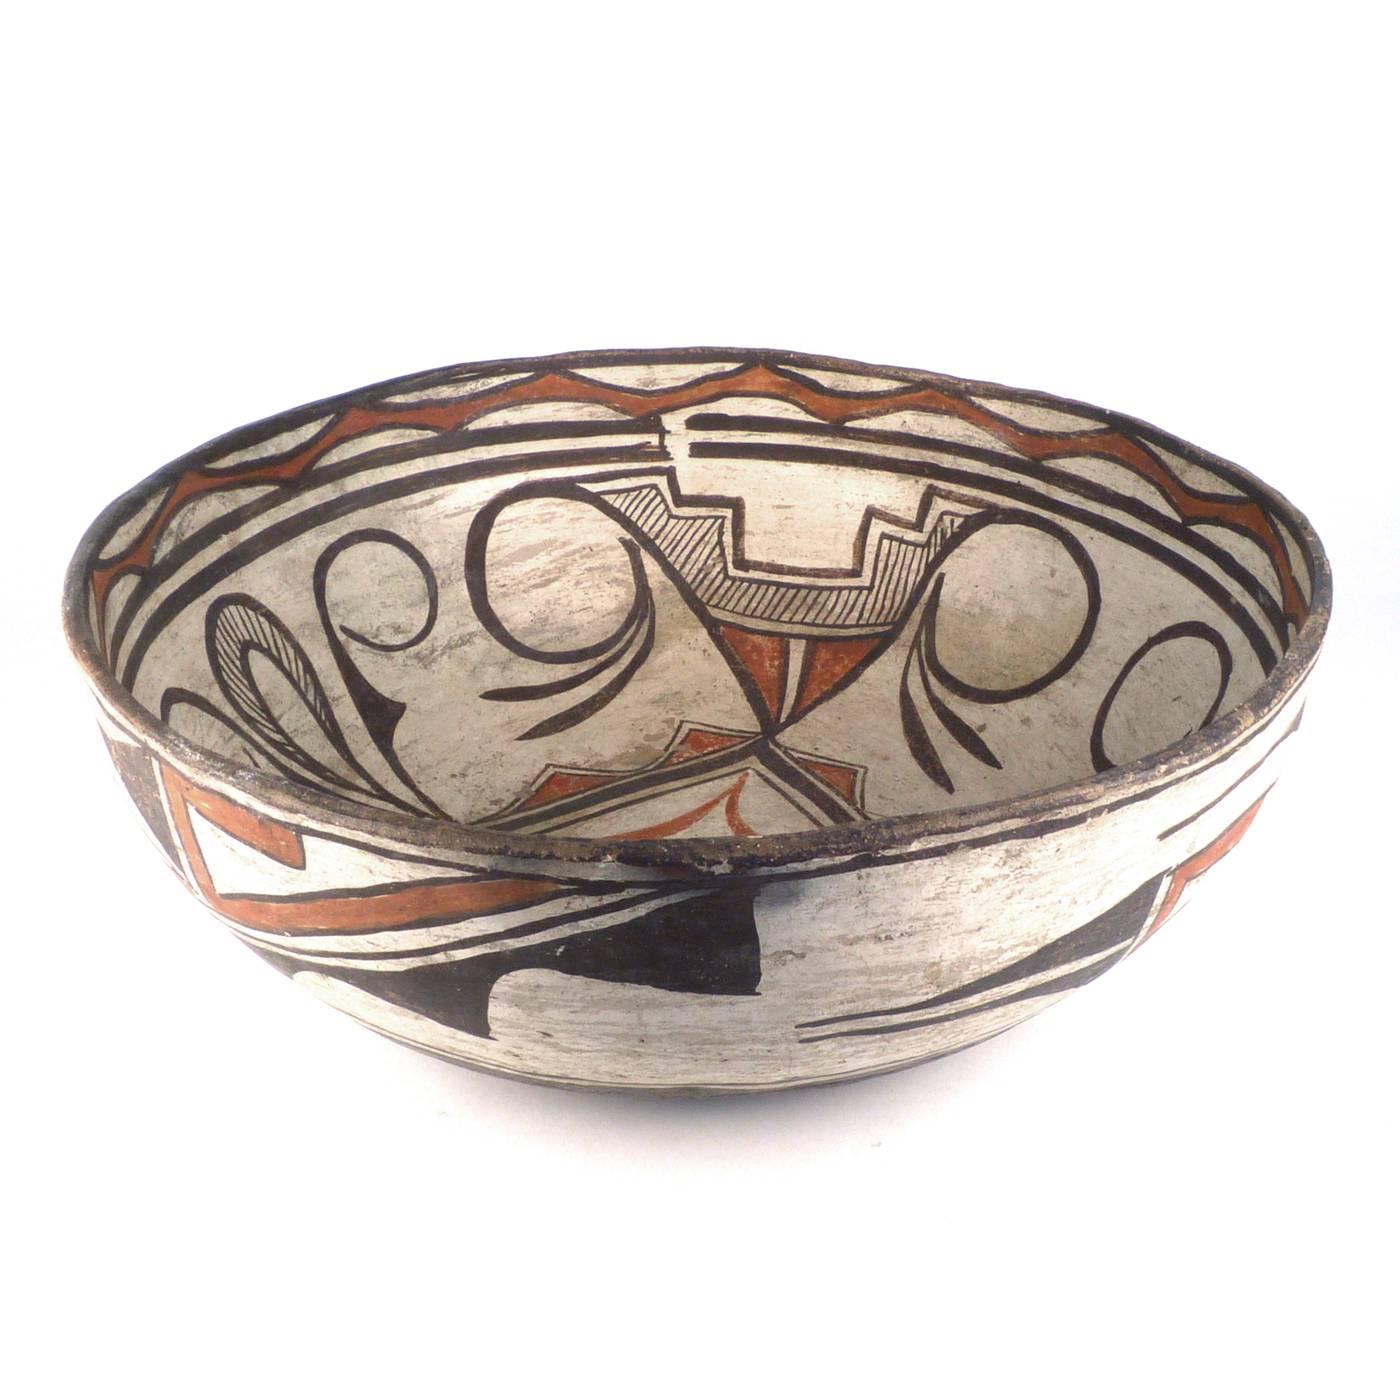 A traditionally made and fired bowl from Zuni Pueblo in New Mexico, dating from the turn of the 20th century. Measures: 14